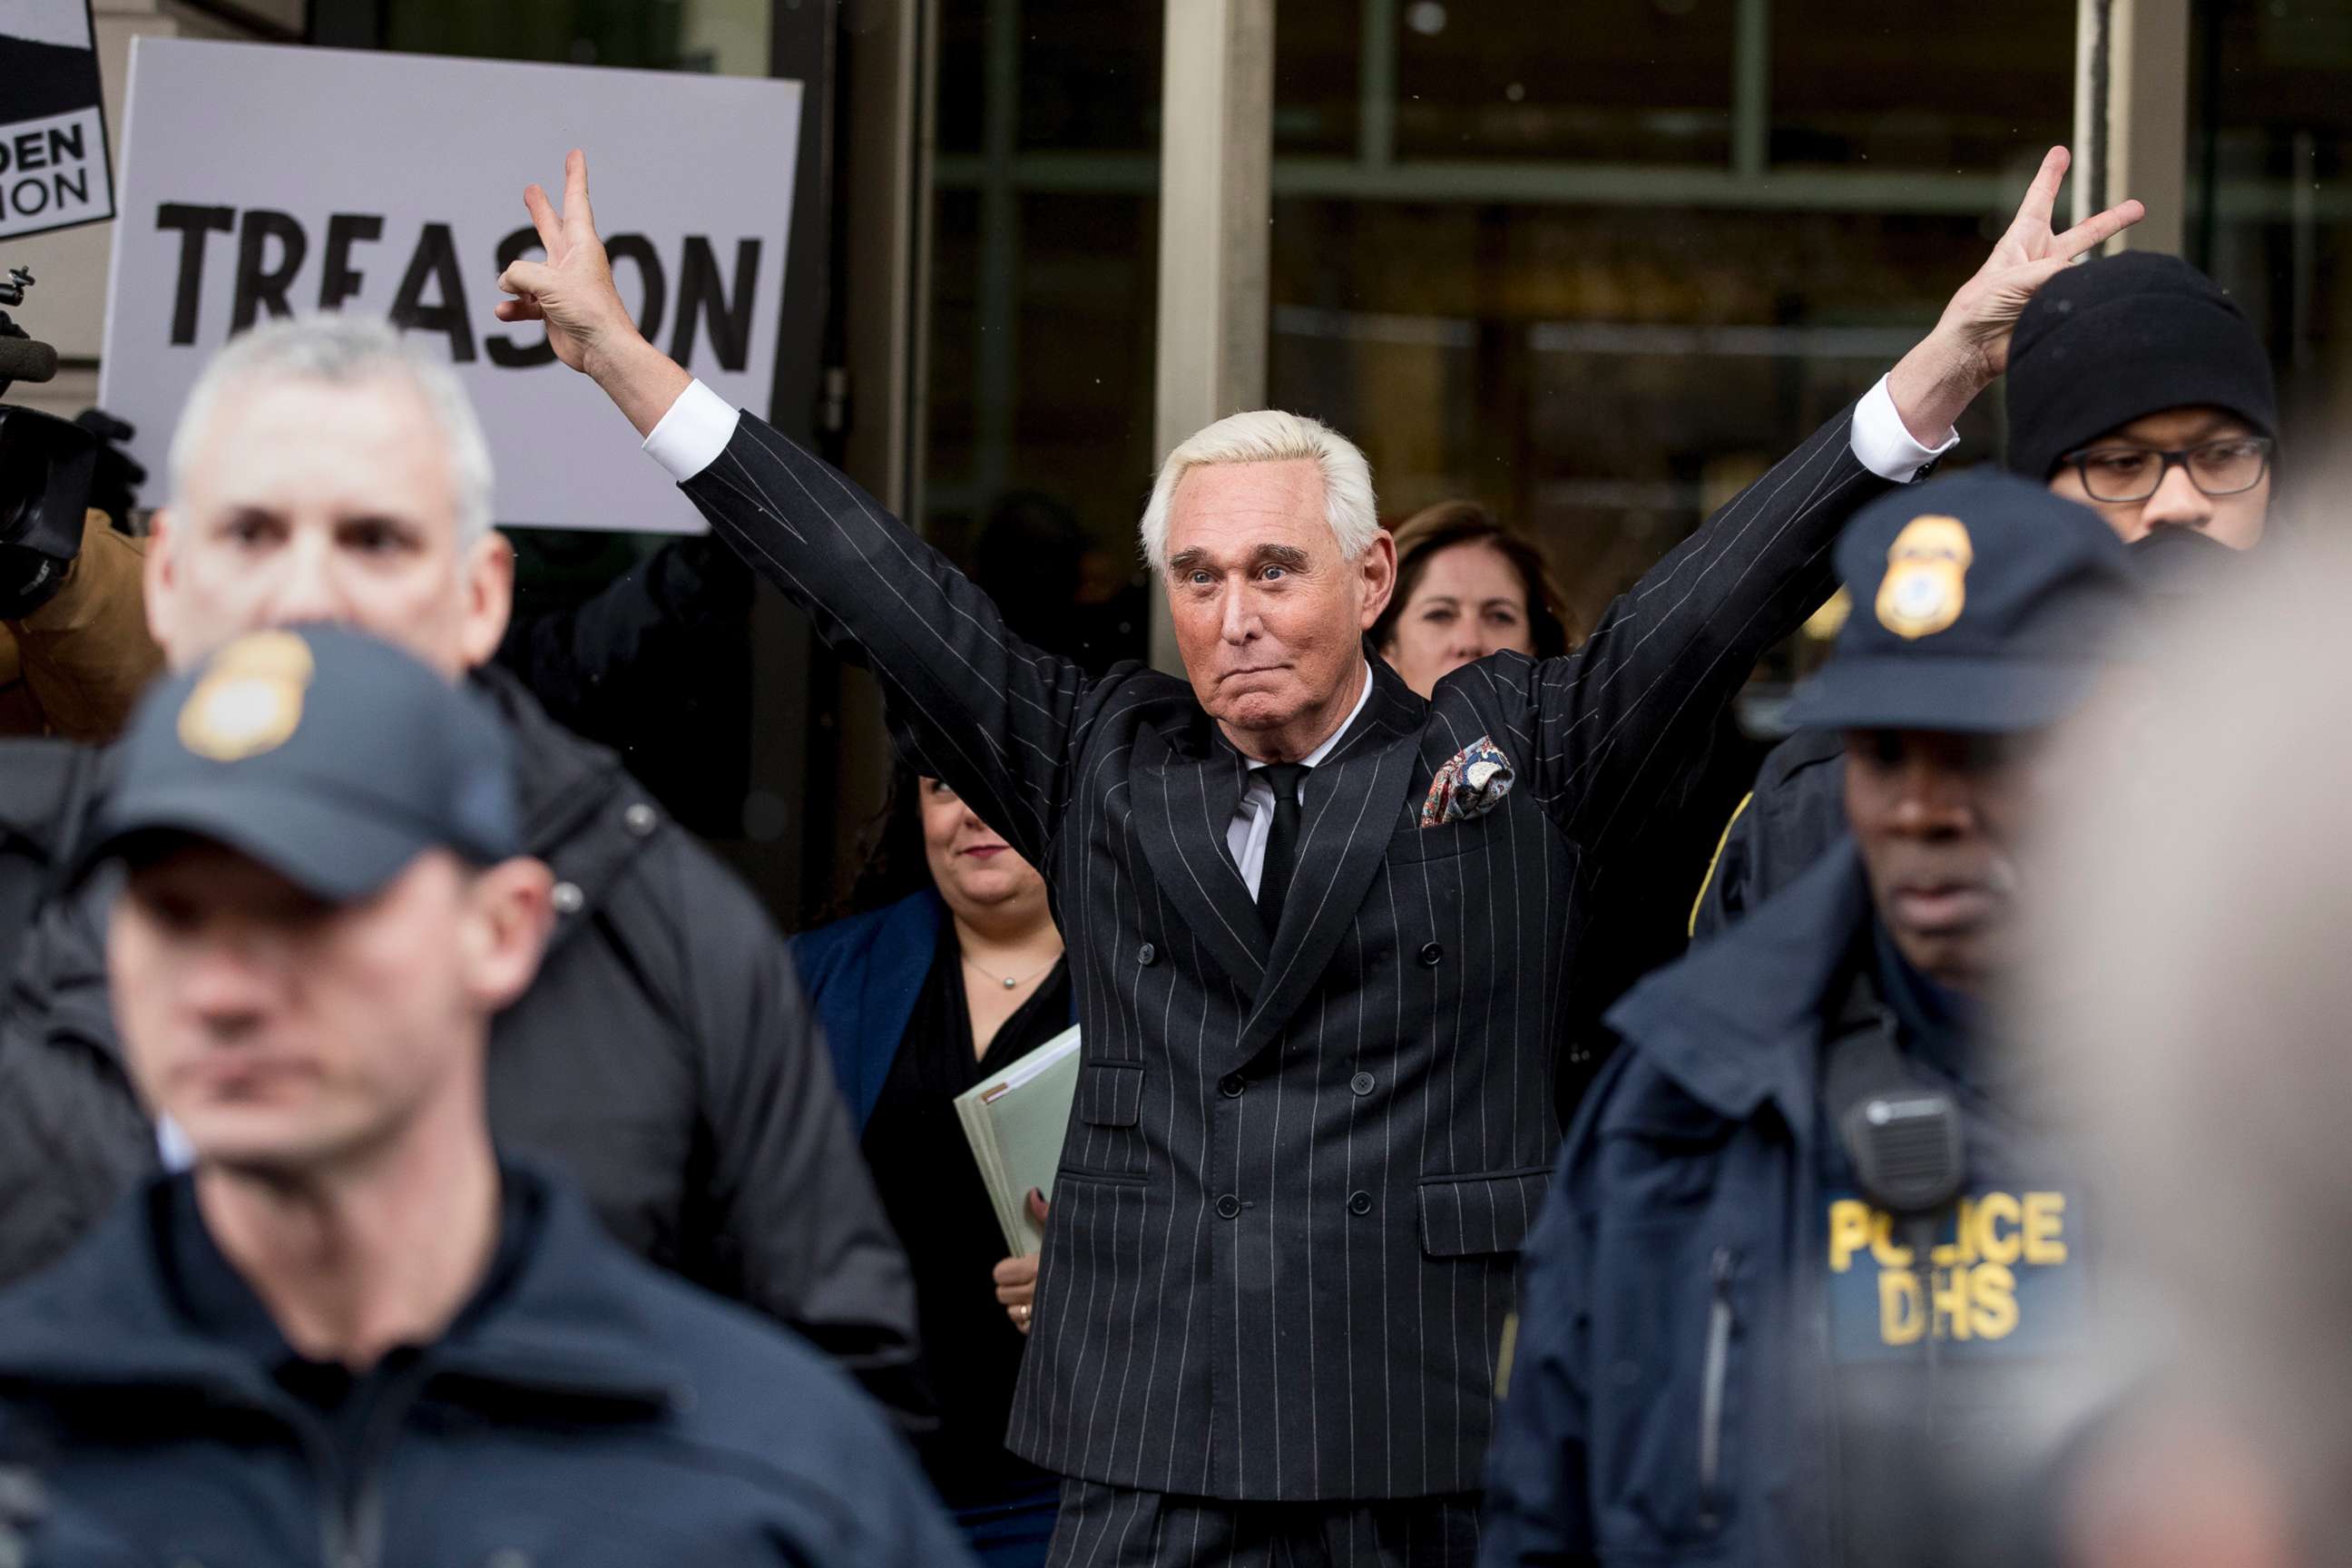 PHOTO: Roger Stone leaves federal court on Feb. 1, 2019 in Washington, D.C.